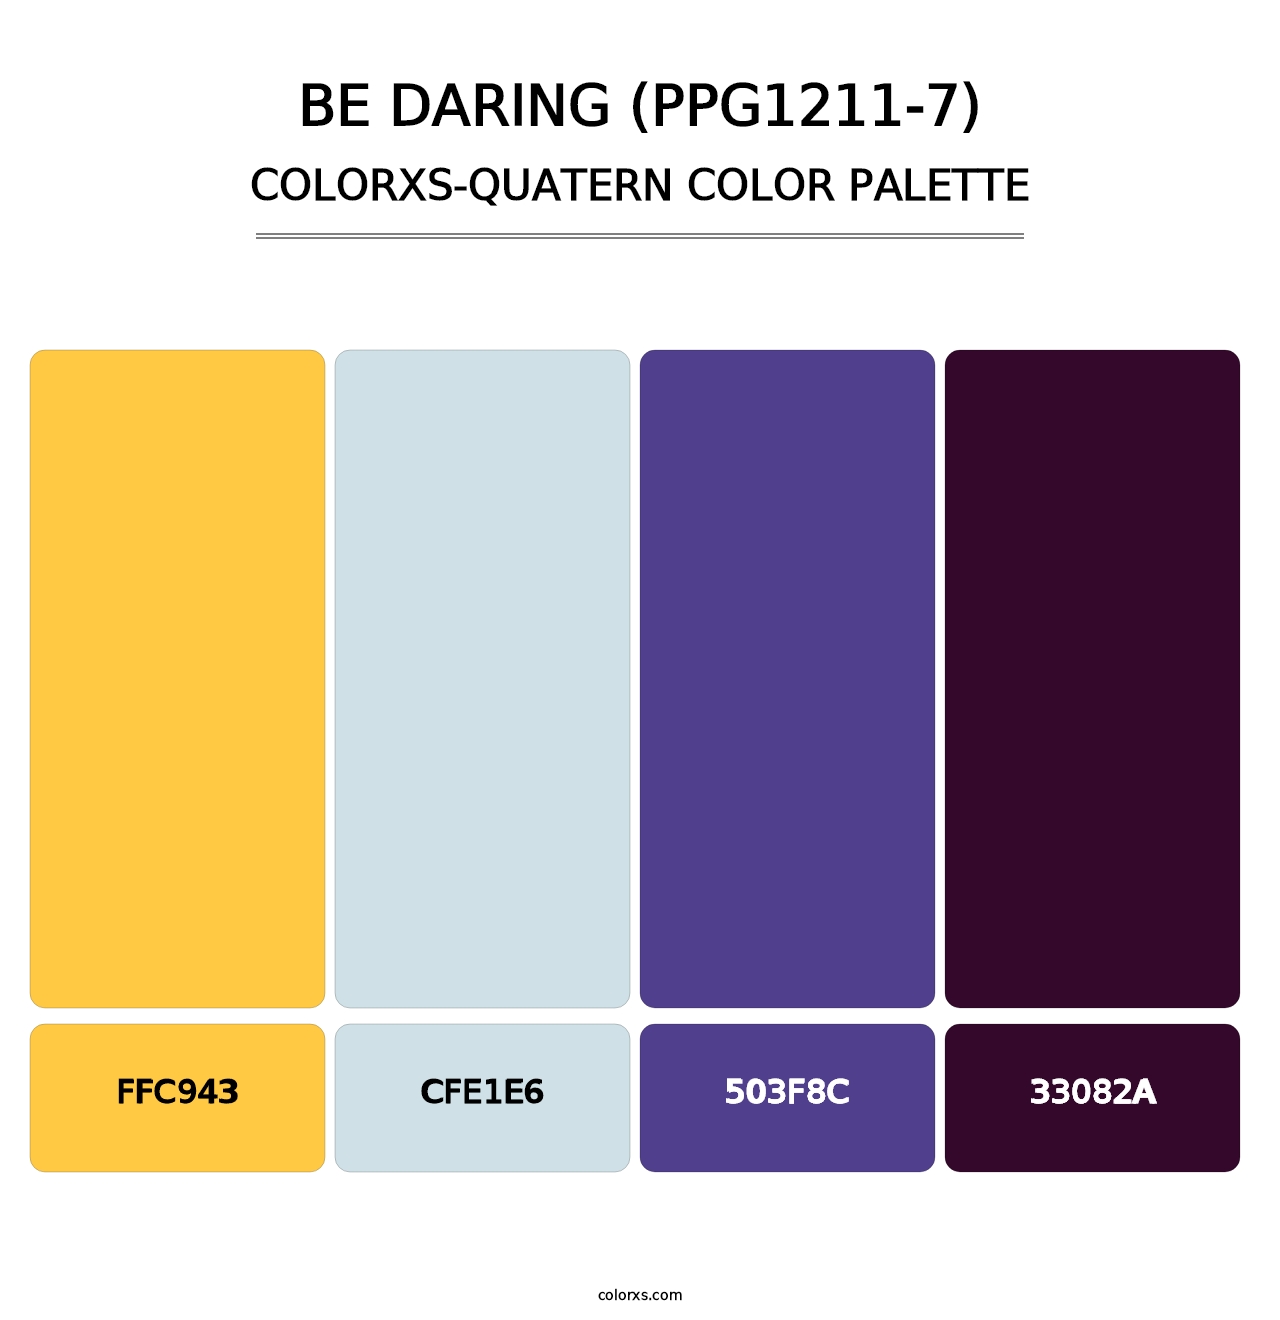 Be Daring (PPG1211-7) - Colorxs Quatern Palette